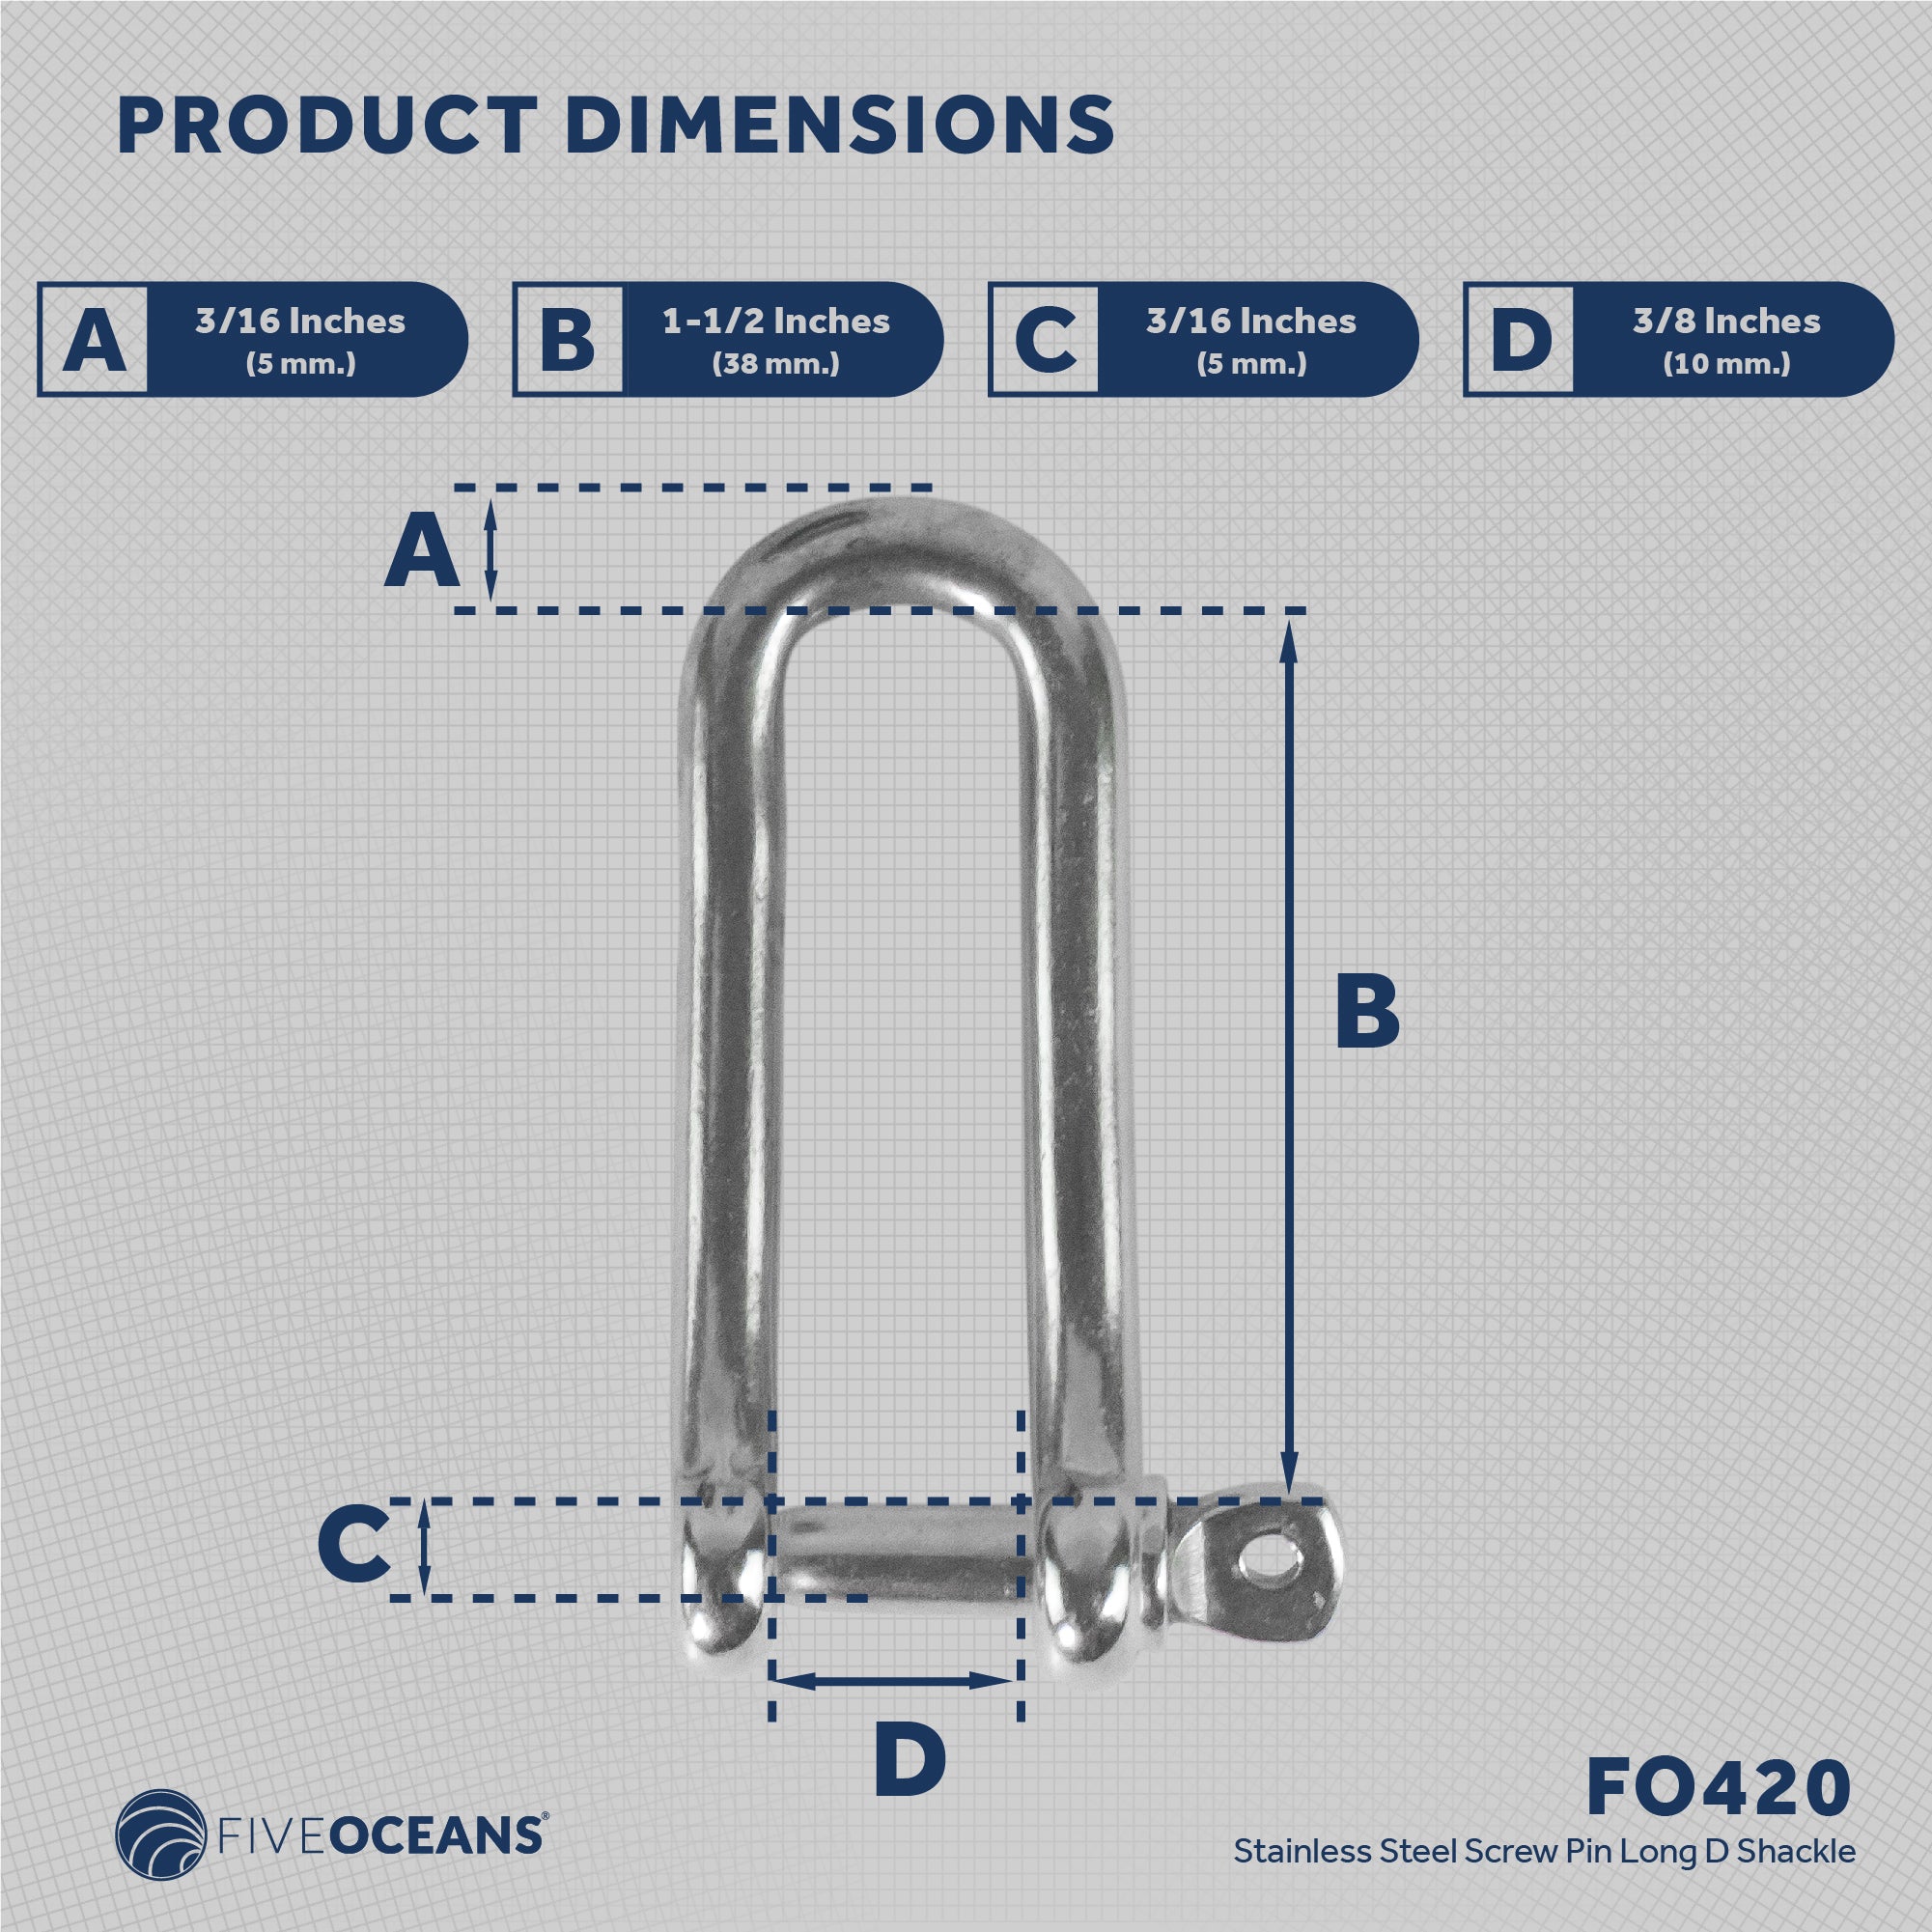 Pin Long D Shackles, 3/16" Stainless Steel - FO420